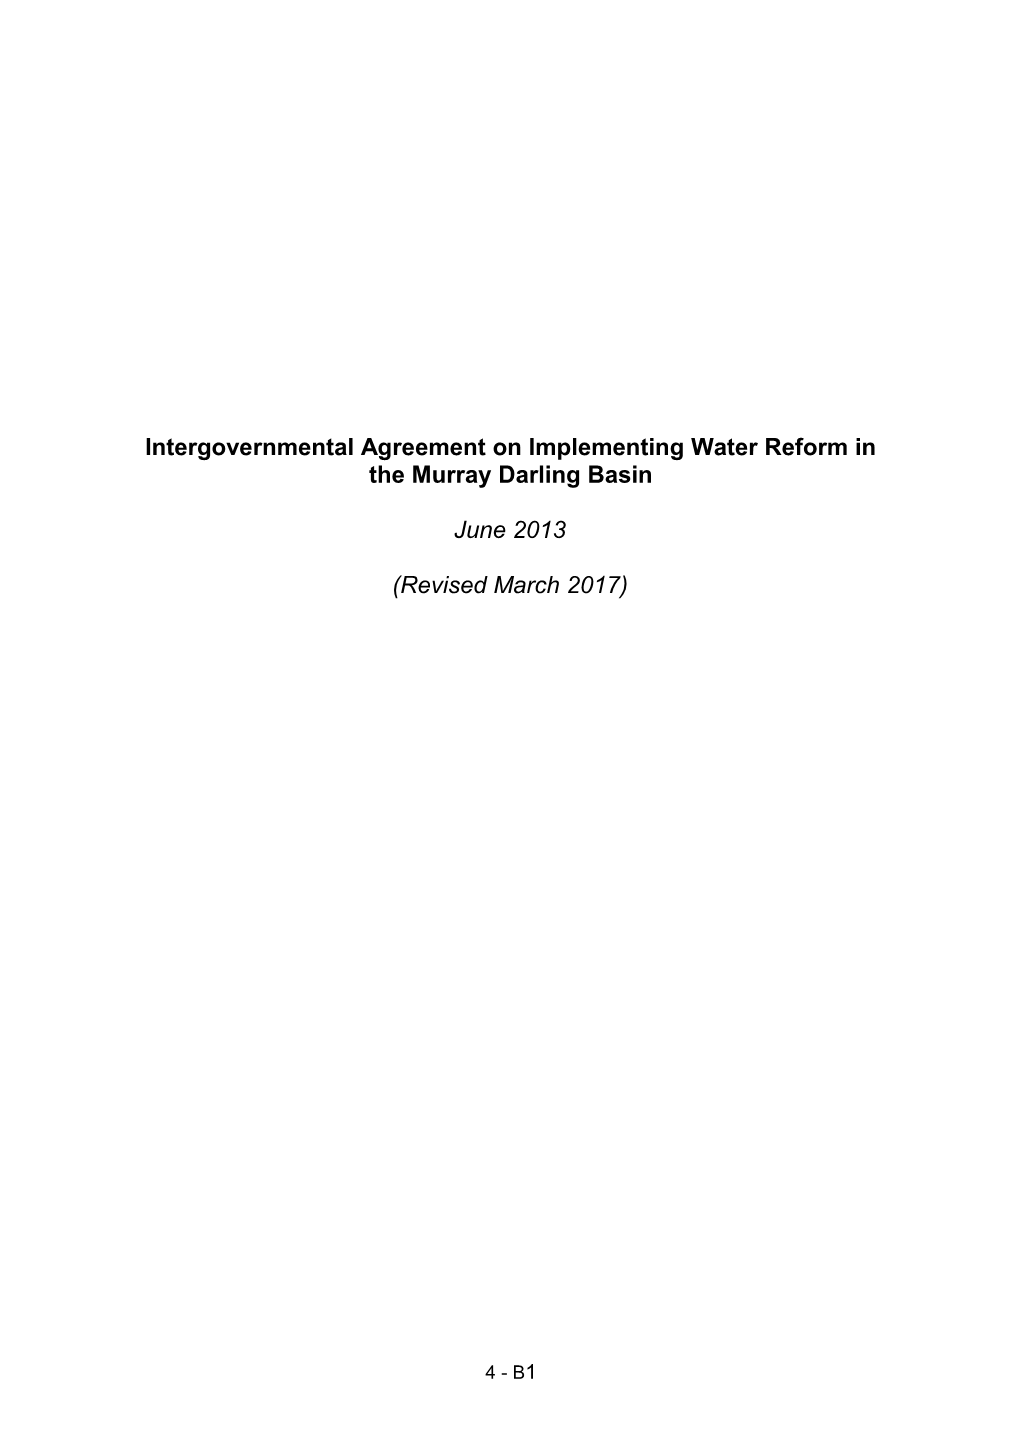 Intergovernmental Agreement on Implementing Water Reform in the Murray Darling Basin (Revised